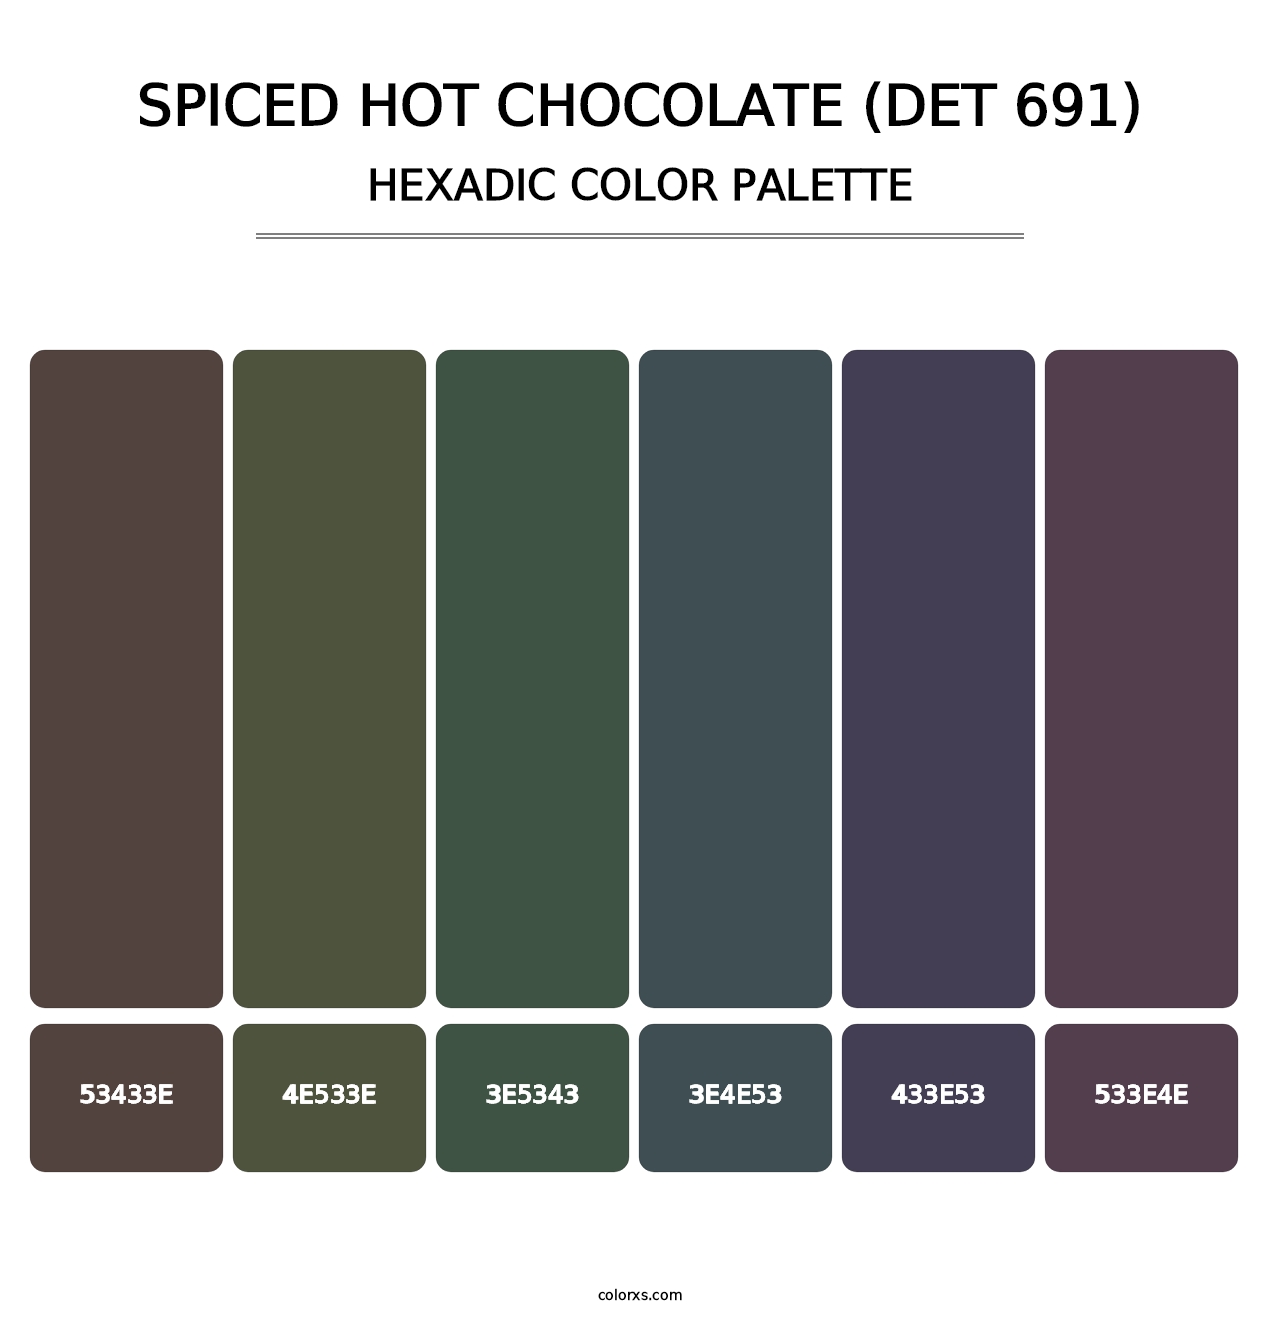 Spiced Hot Chocolate (DET 691) - Hexadic Color Palette